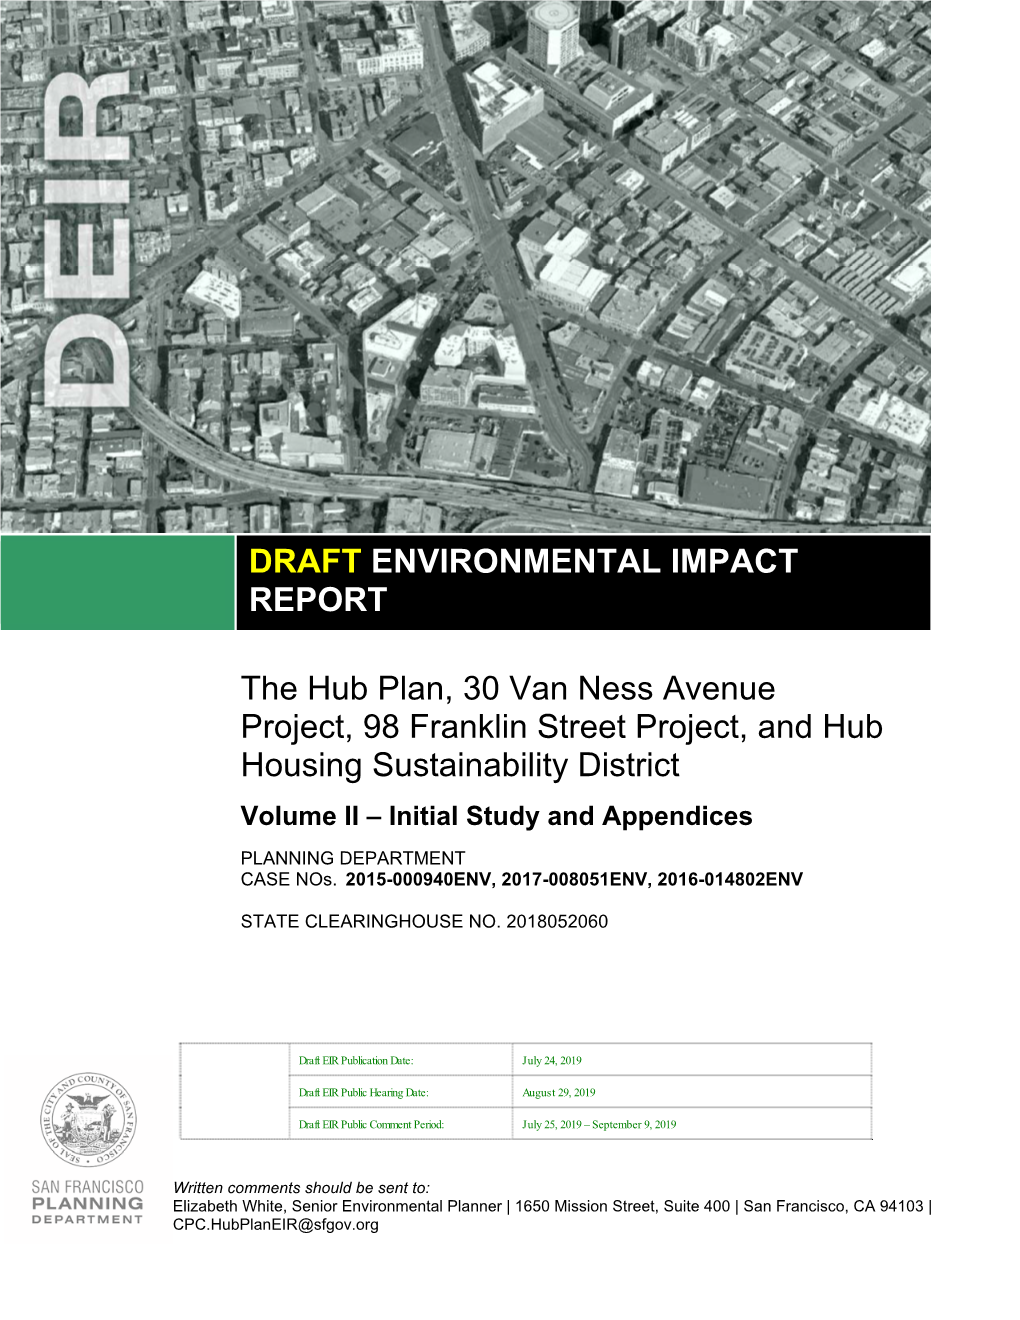 DRAFT ENVIRONMENTAL IMPACT REPORT the Hub Plan, 30 Van Ness Avenue Project, 98 Franklin Street Project, and Hub Housing Sustaina